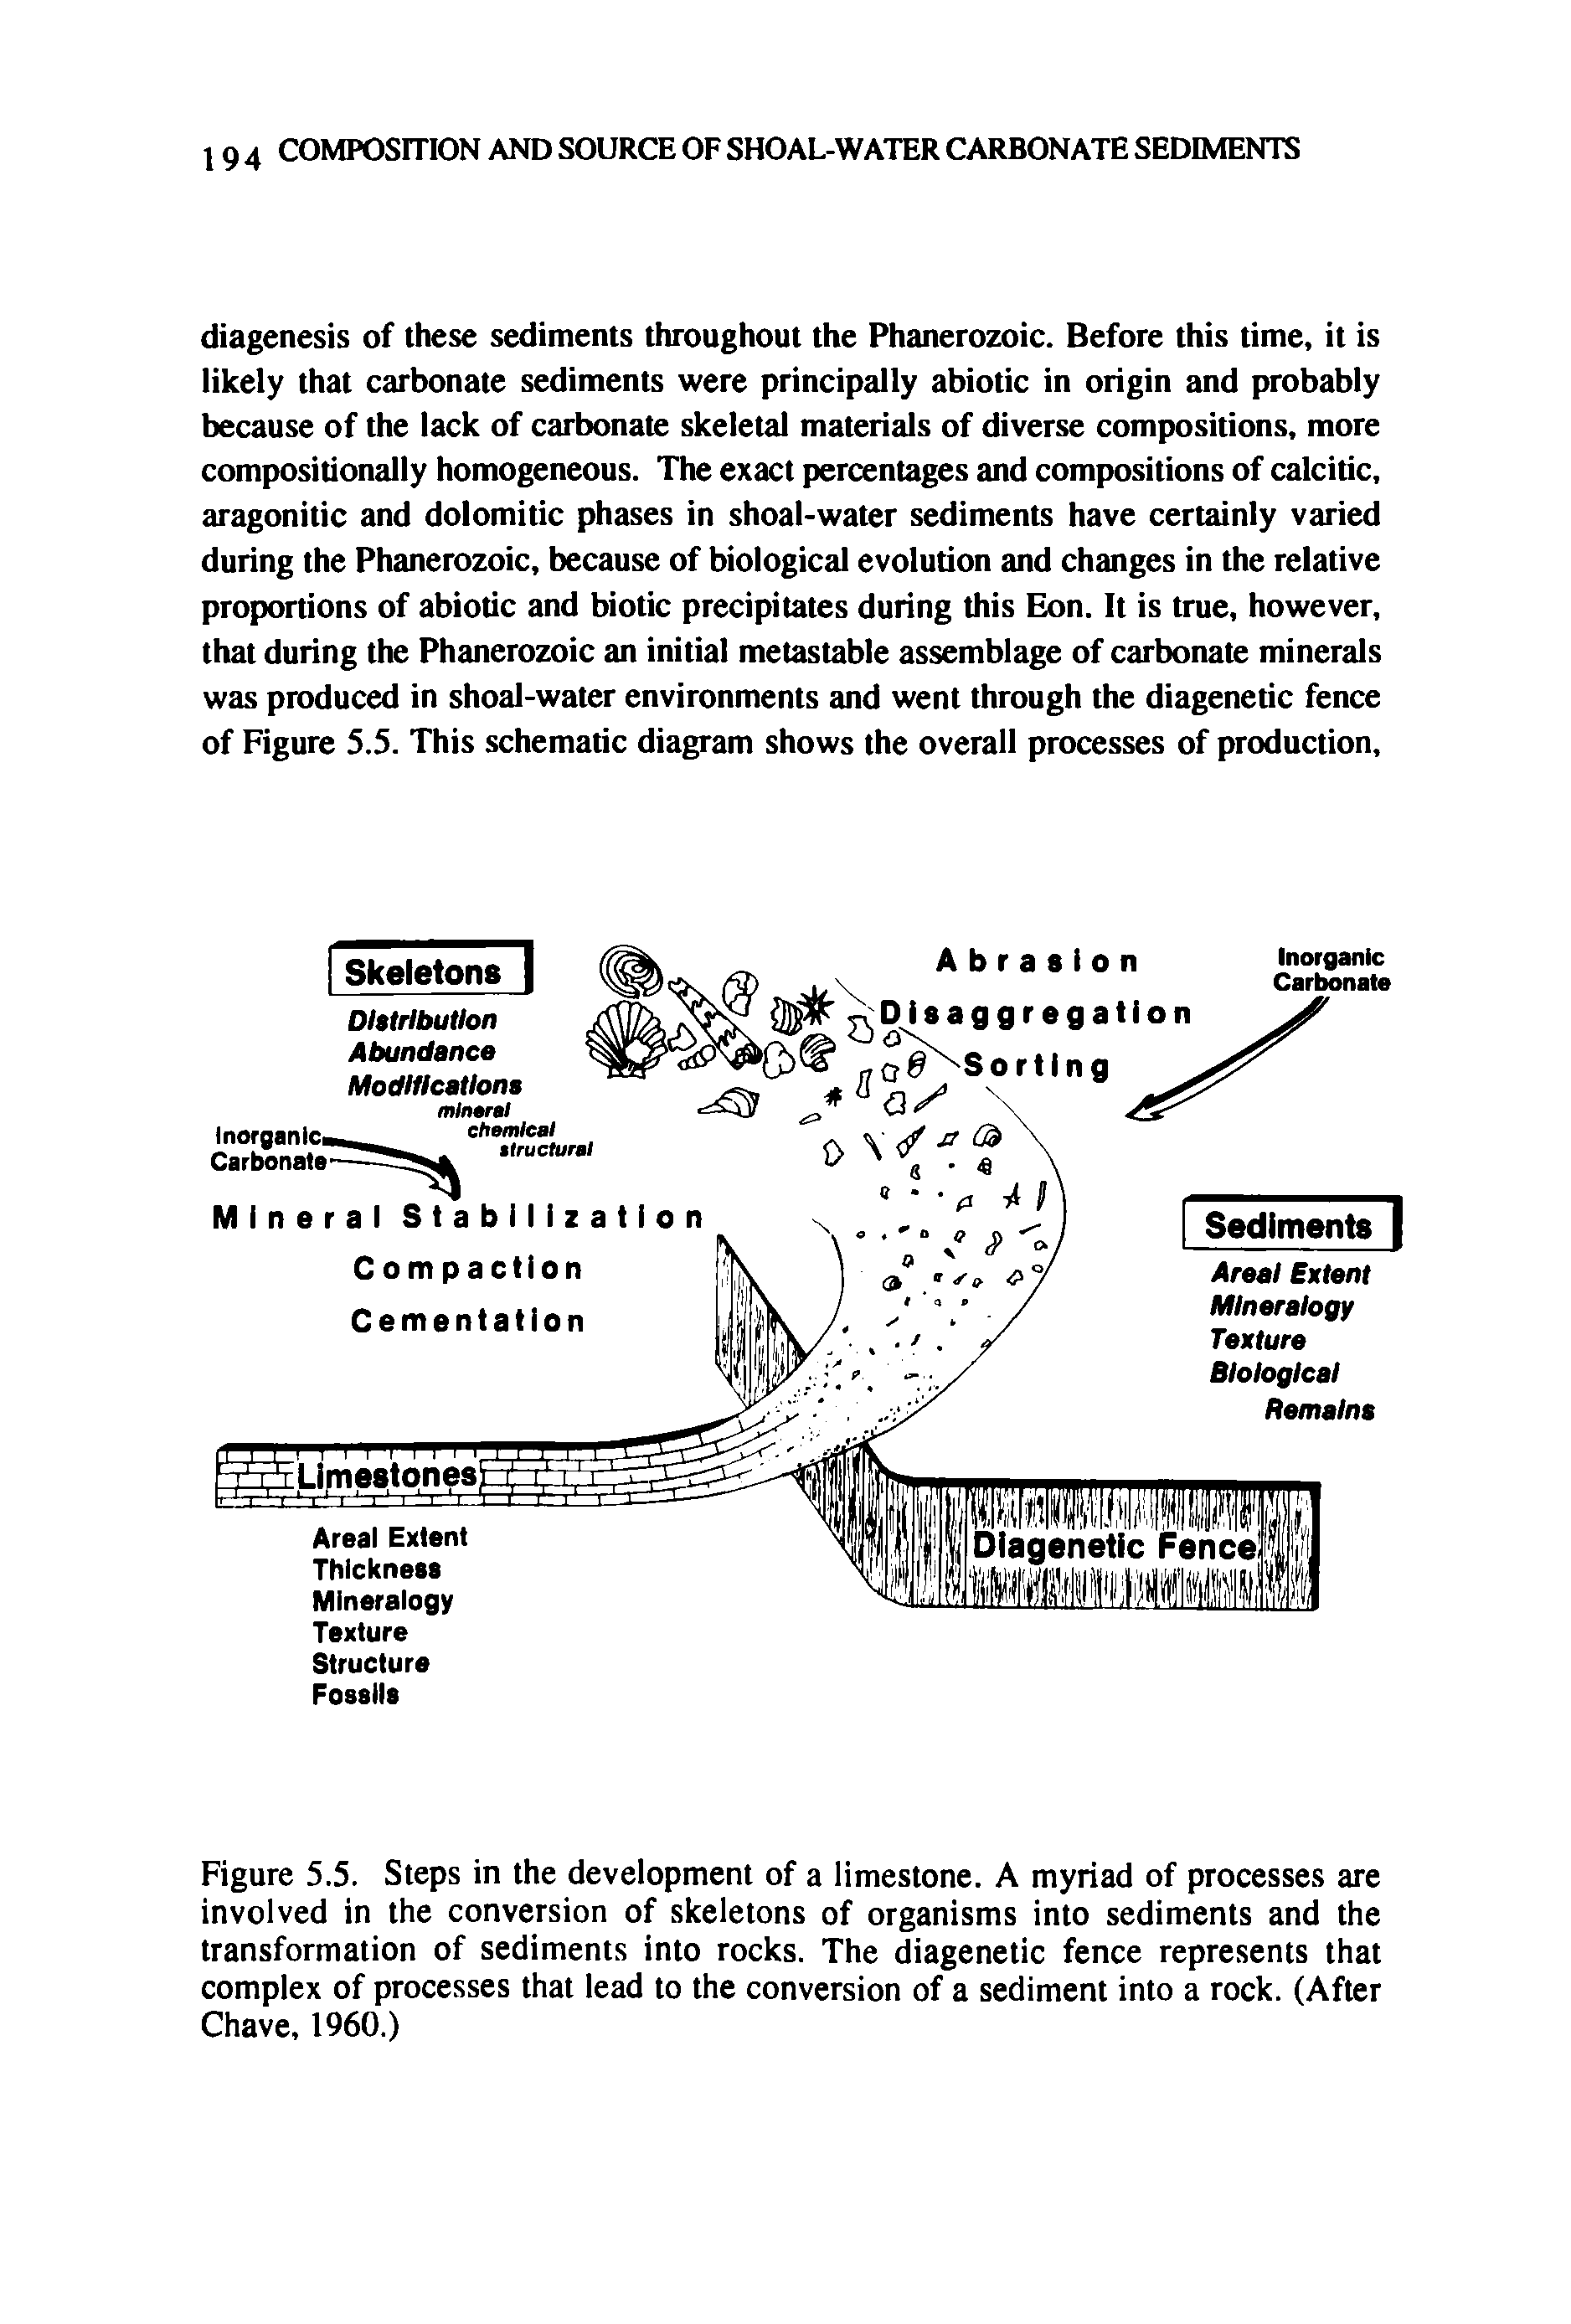 Figure 5.5. Steps in the development of a limestone. A myriad of processes are involved in the conversion of skeletons of organisms into sediments and the transformation of sediments into rocks. The diagenetic fence represents that complex of processes that lead to the conversion of a sediment into a rock. (After Chave, 1960.)...